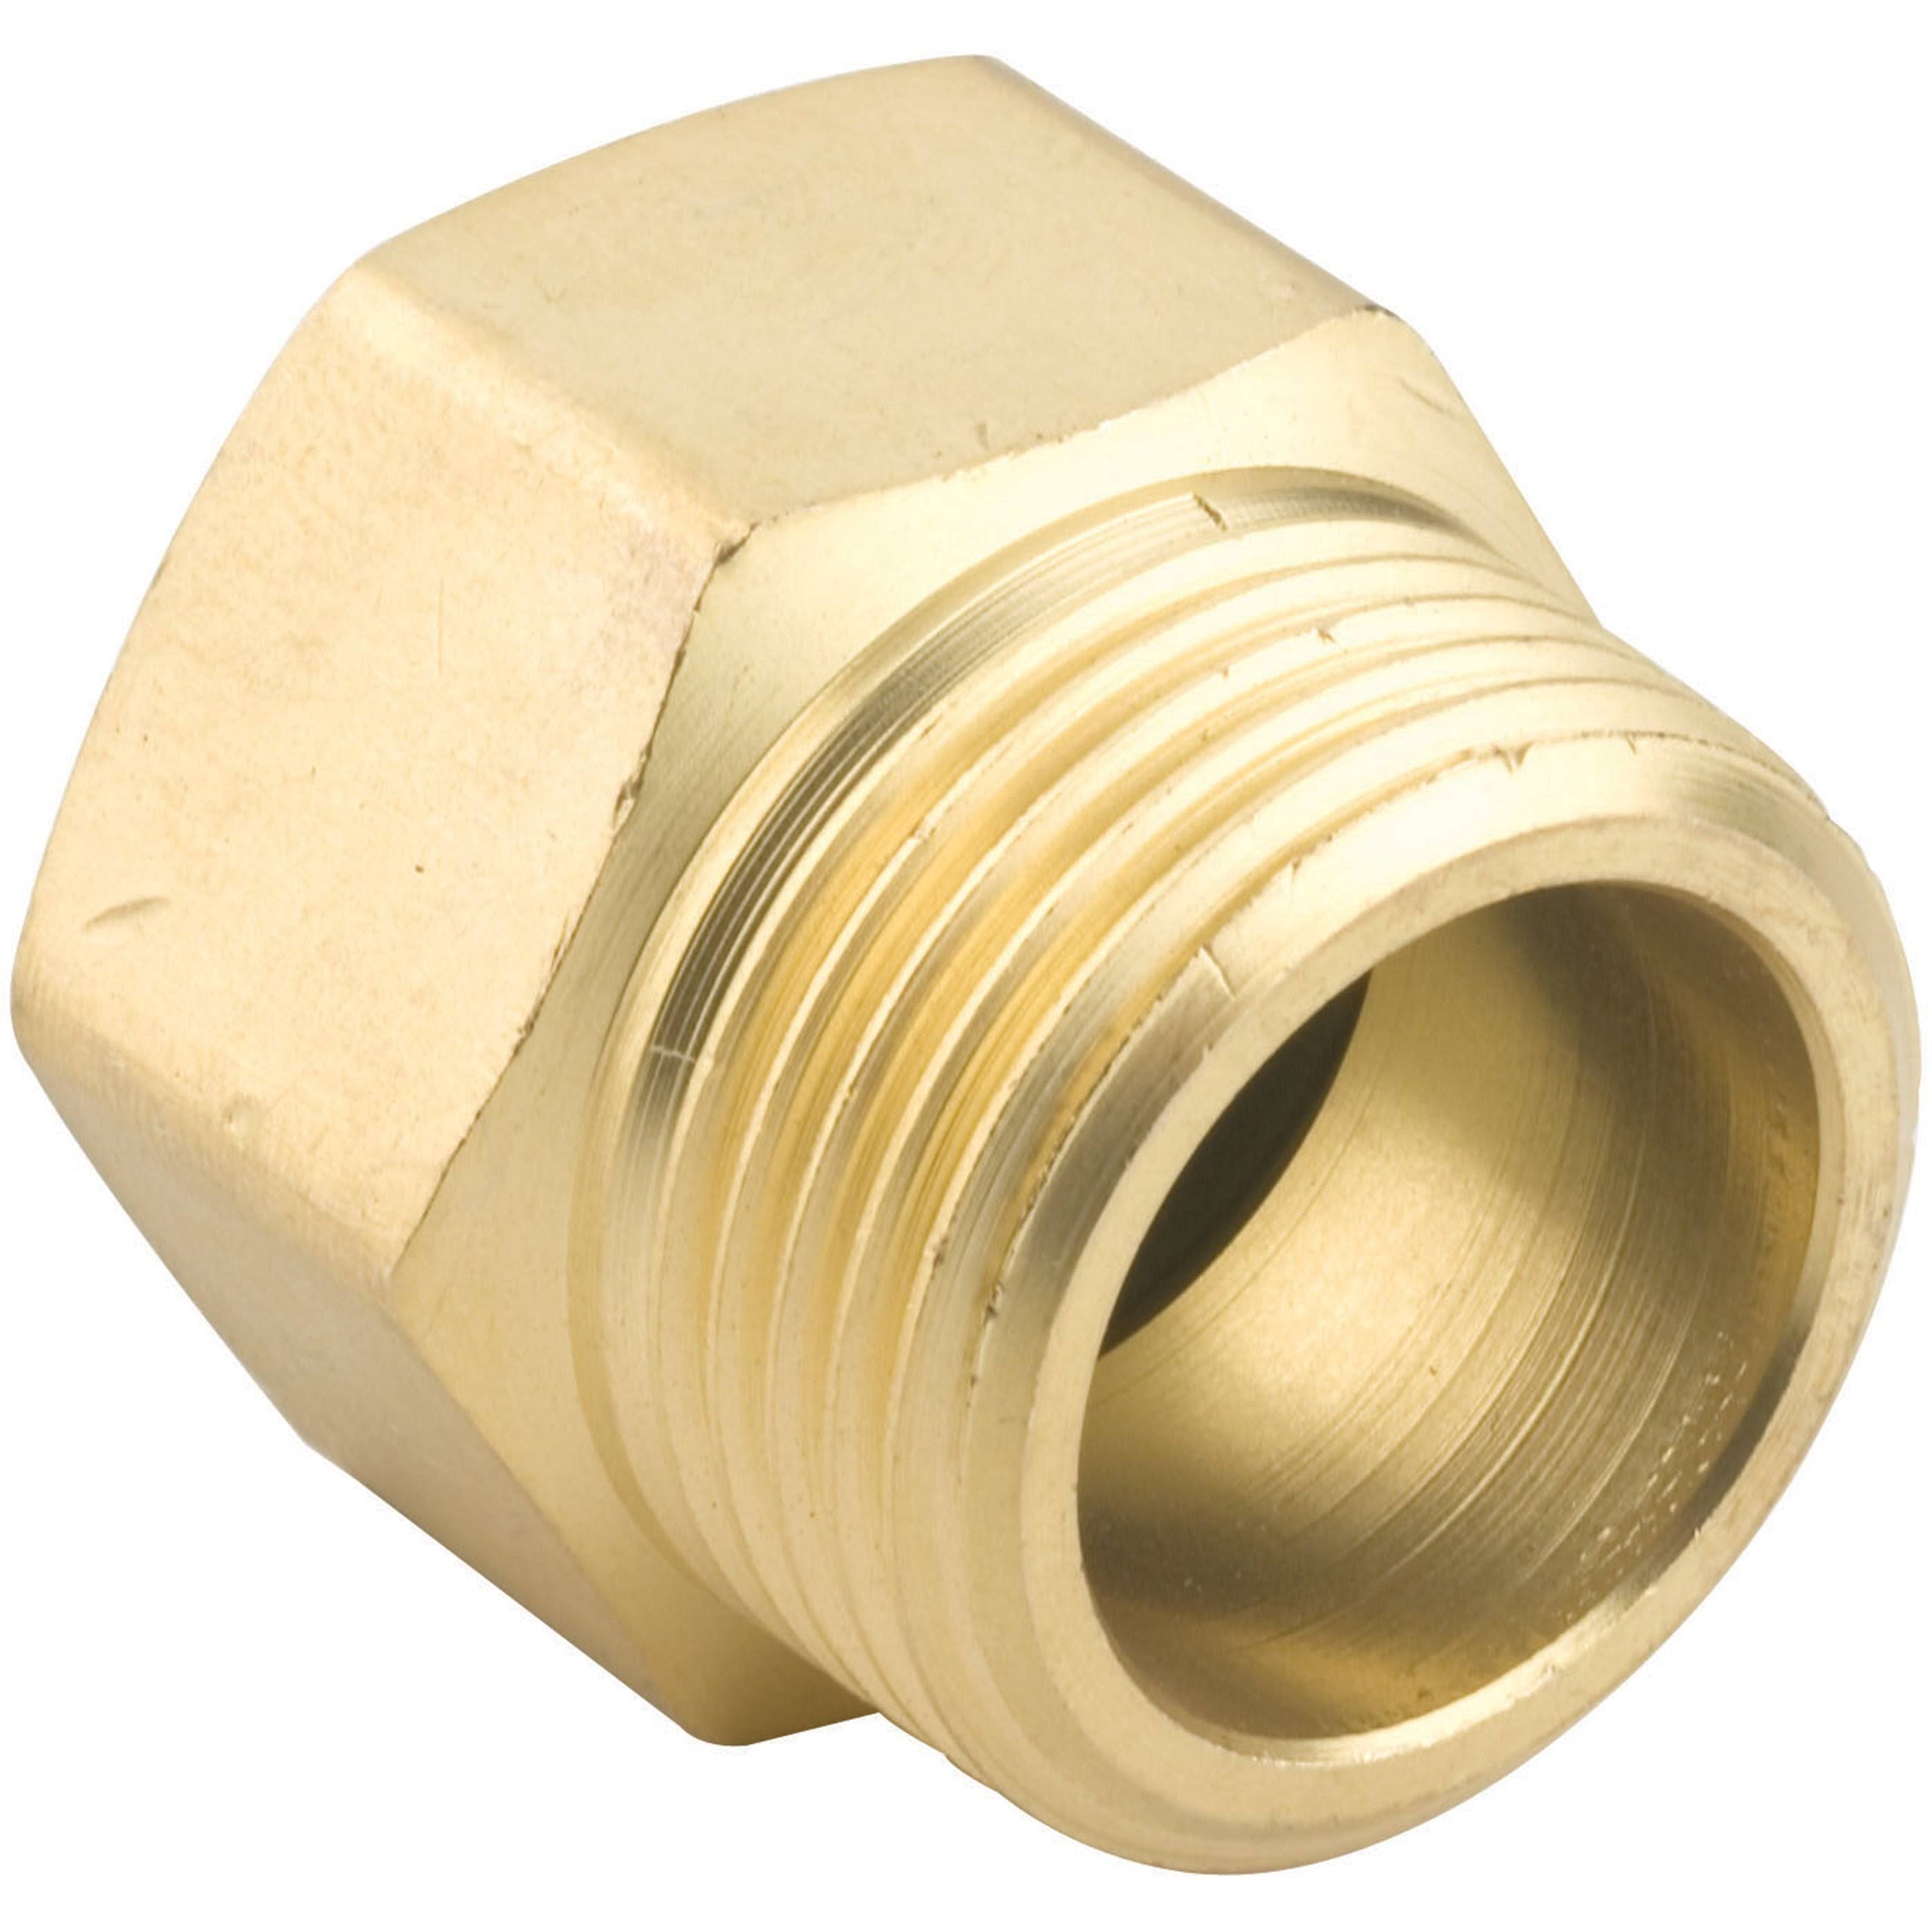 Gilmour Male Hose Connector - 3/4", Brass